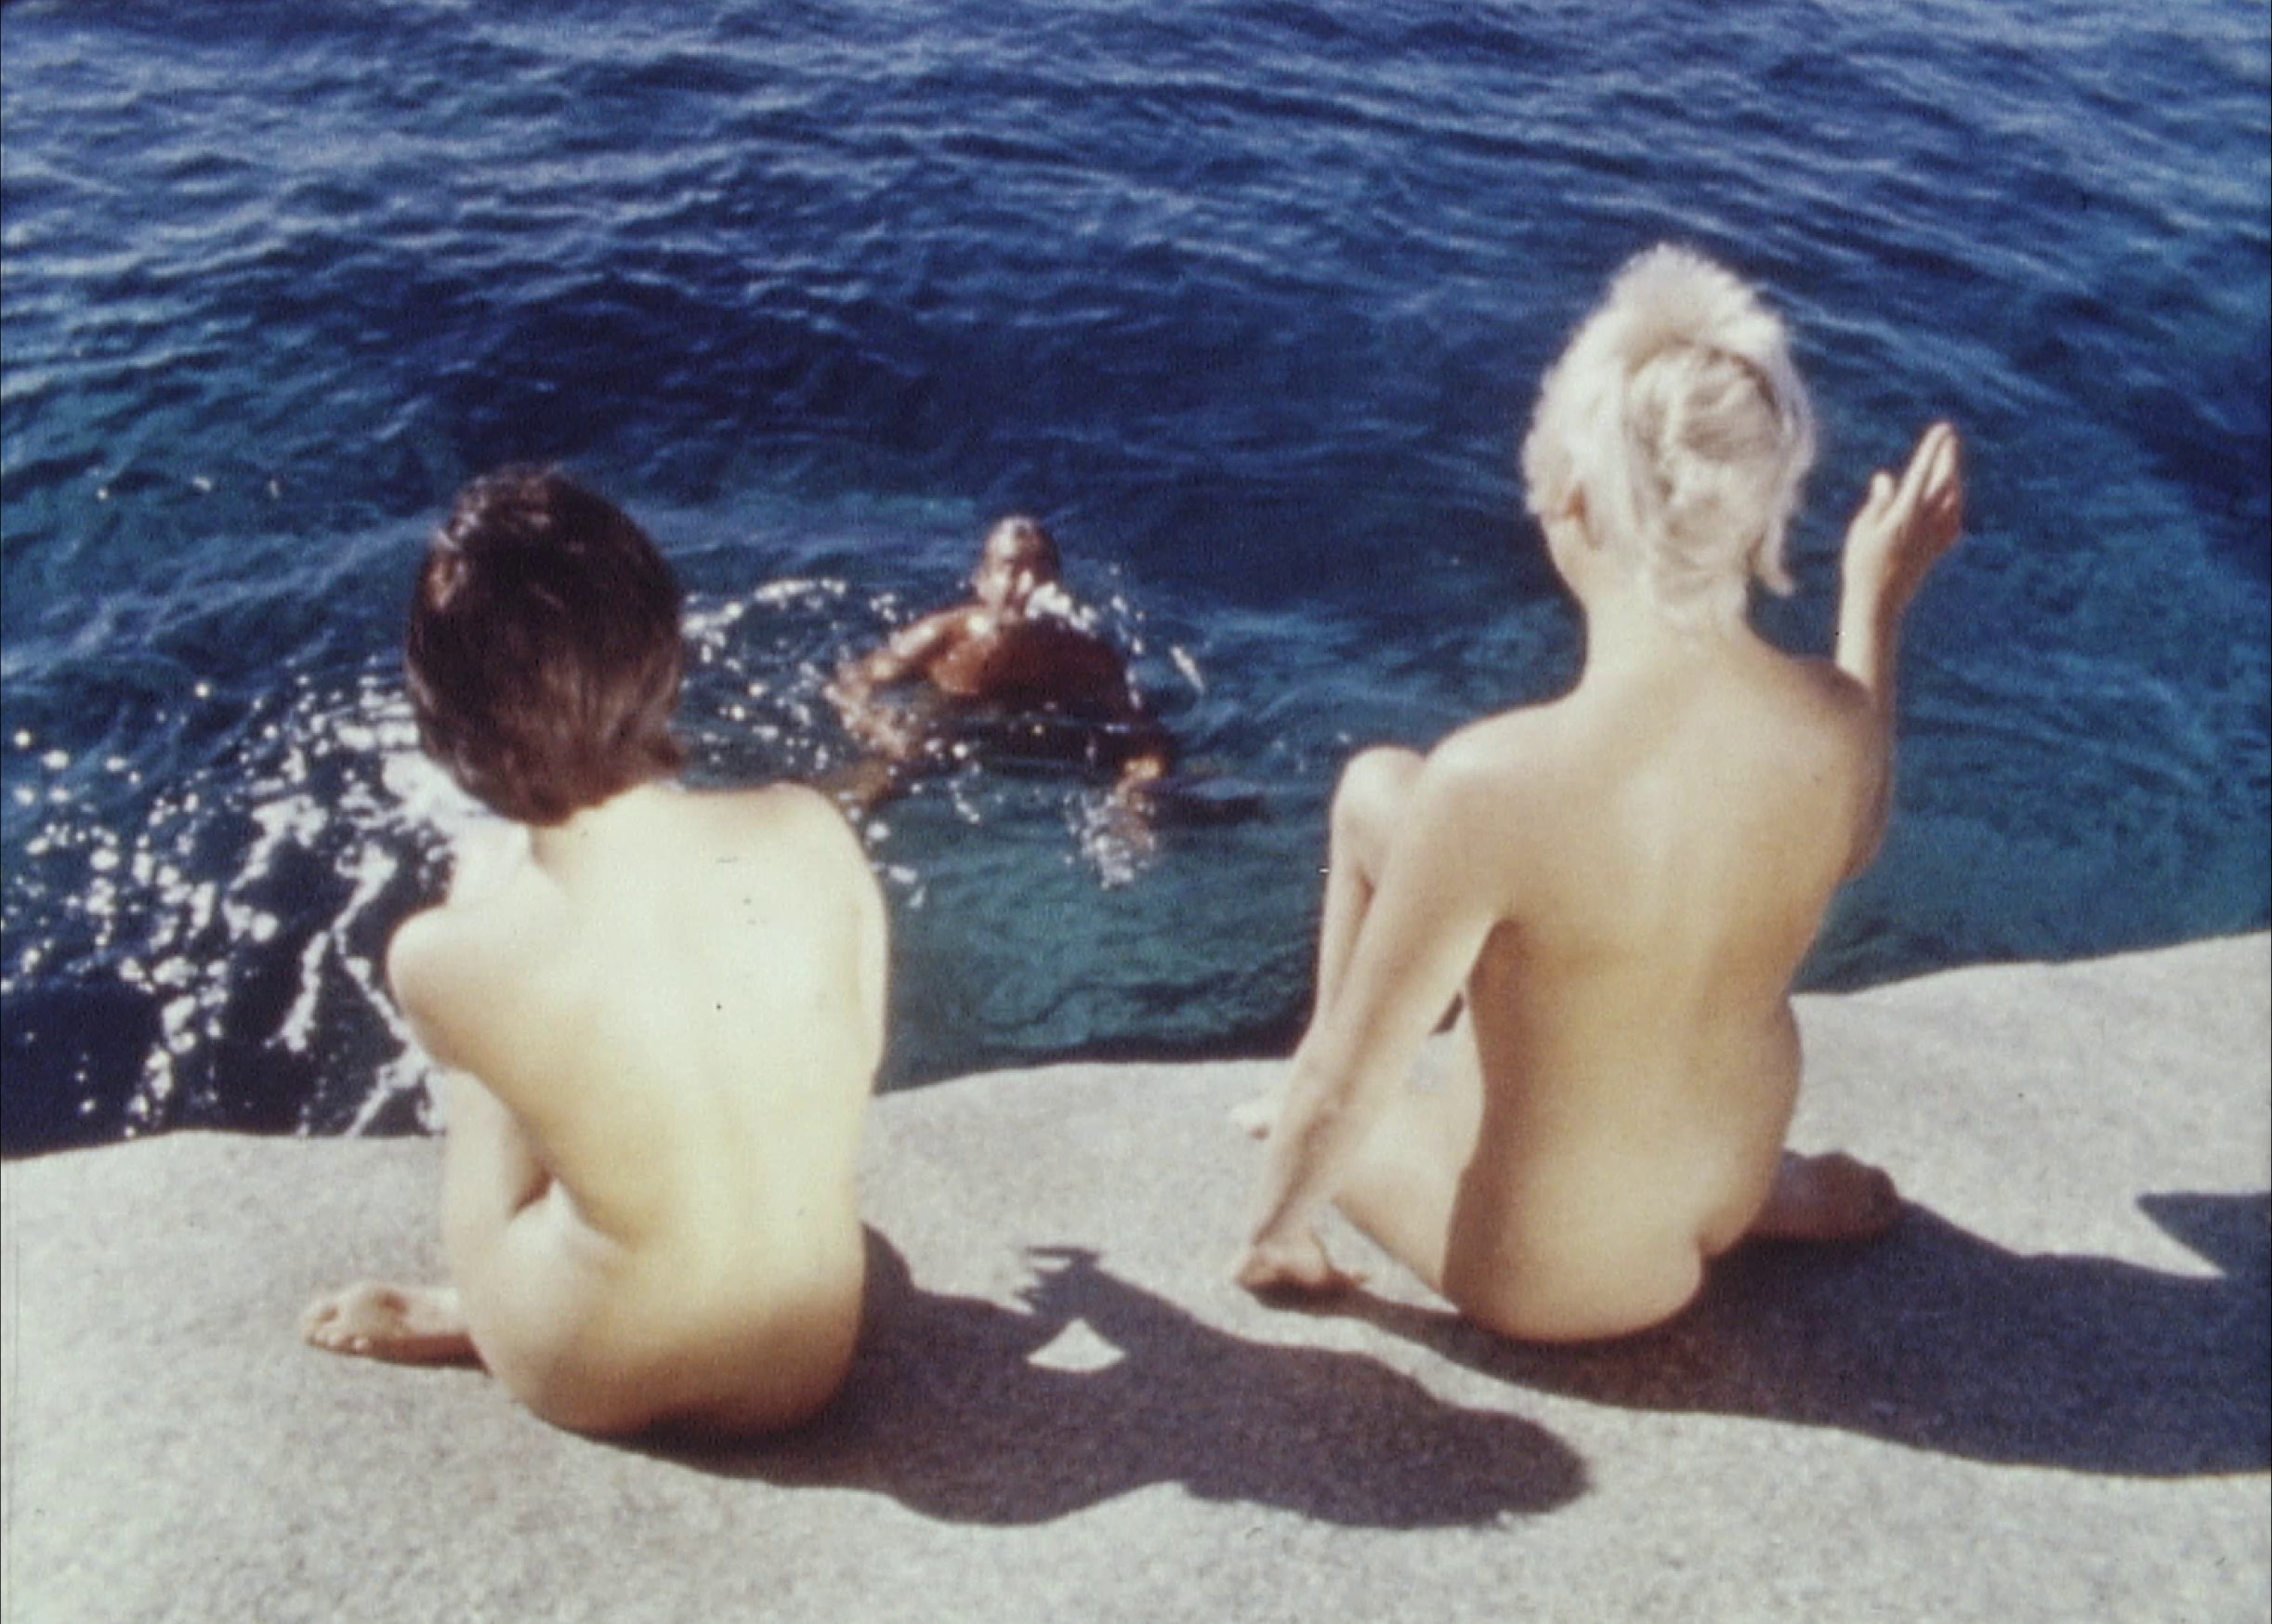 Sun-drenched nudist films from the 50s and photo